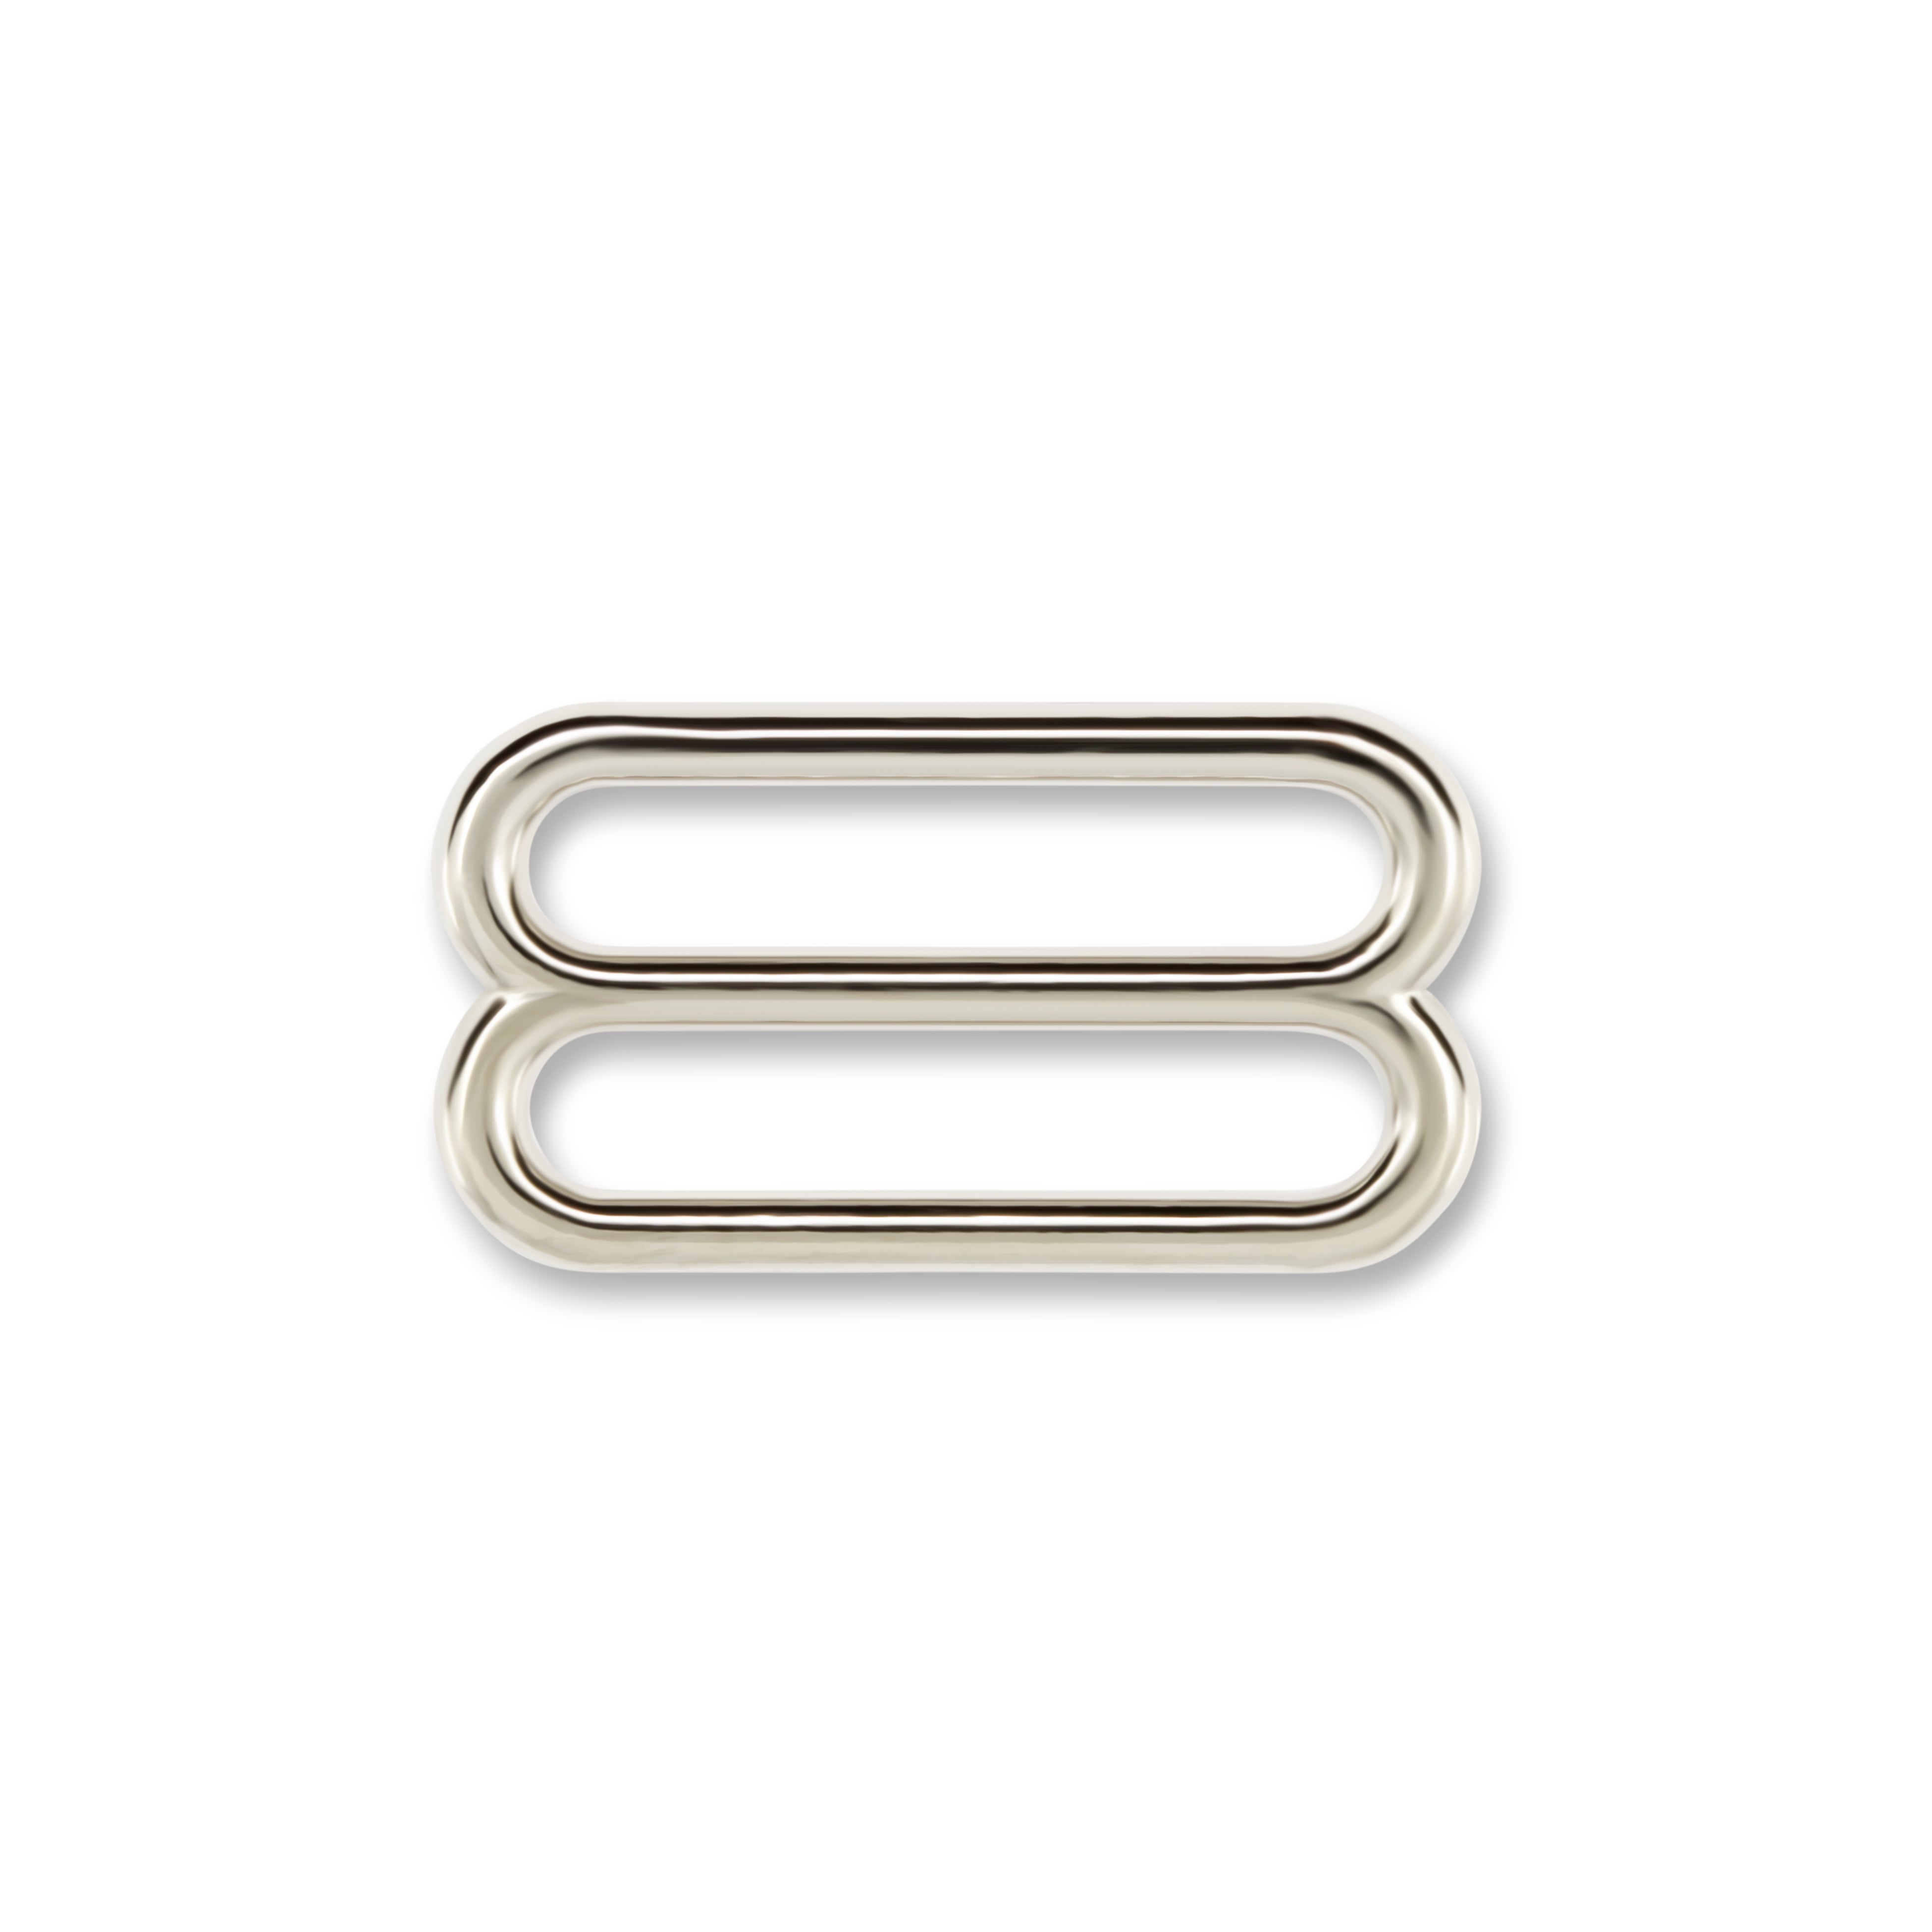 Dritz 1-5/8 inch Overall Buckles with No-Sew Buttons, Nickel, 2 pc